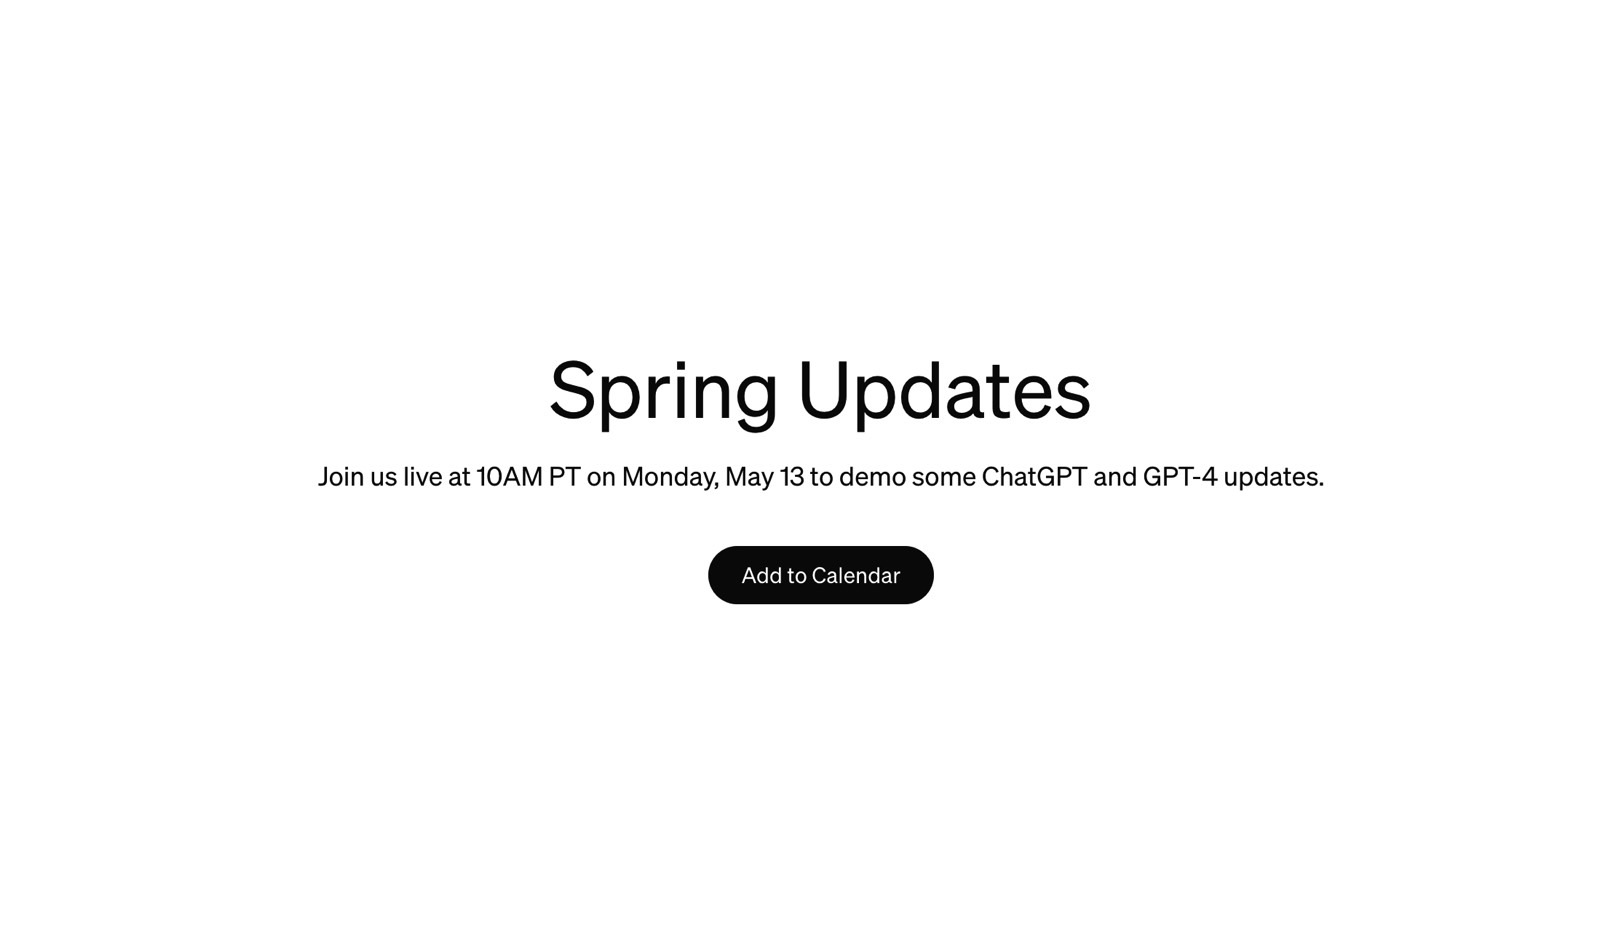 ChatGPT Spring Updates event will stream live on OpenAI.com and YouTube.